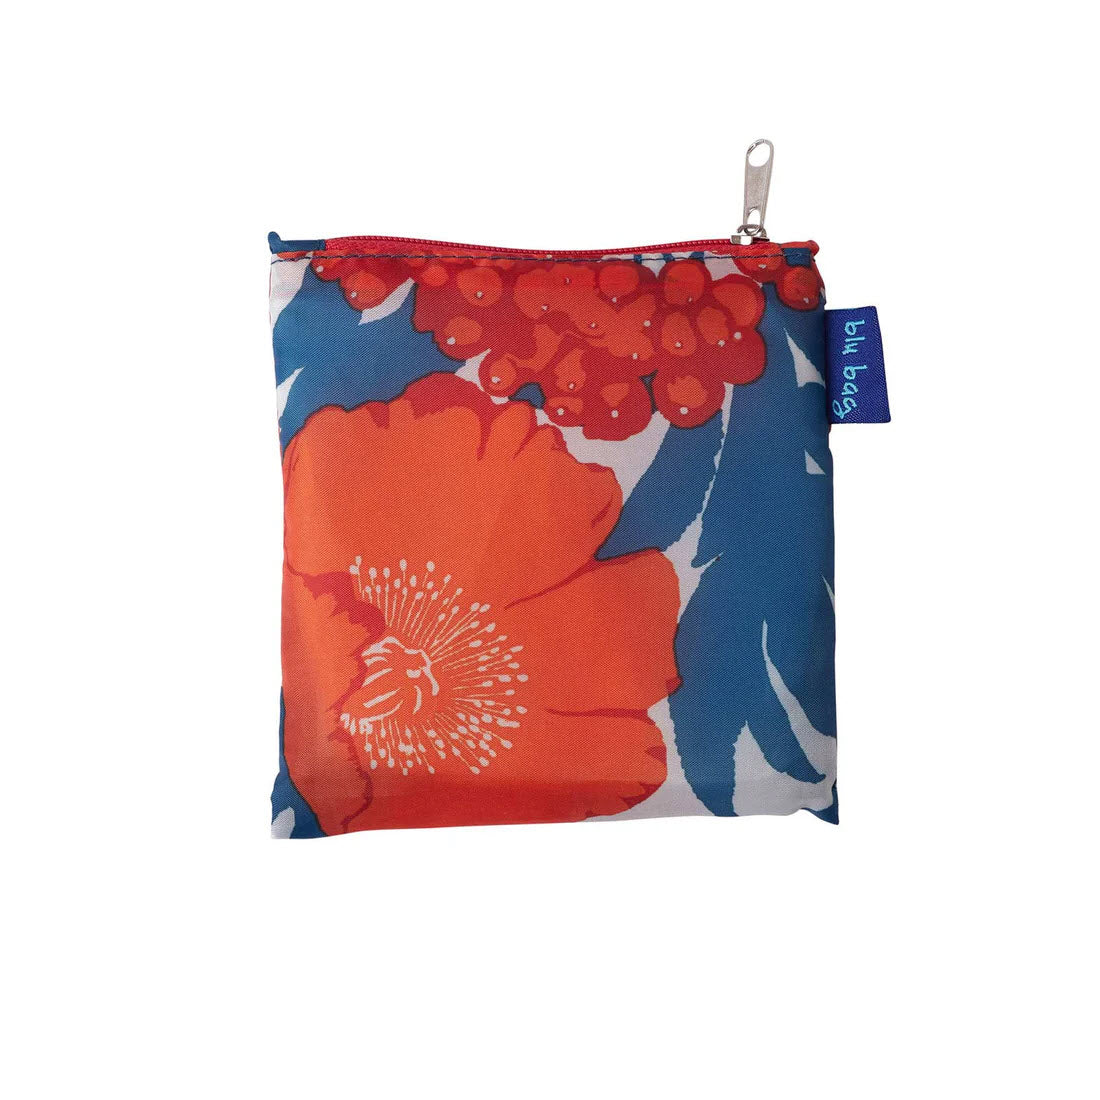 A BLU BAG ICELANDIC POPPIES in vibrant colors of red and blue, featuring a prominent flower design and a small Rockflowerpaper tag.